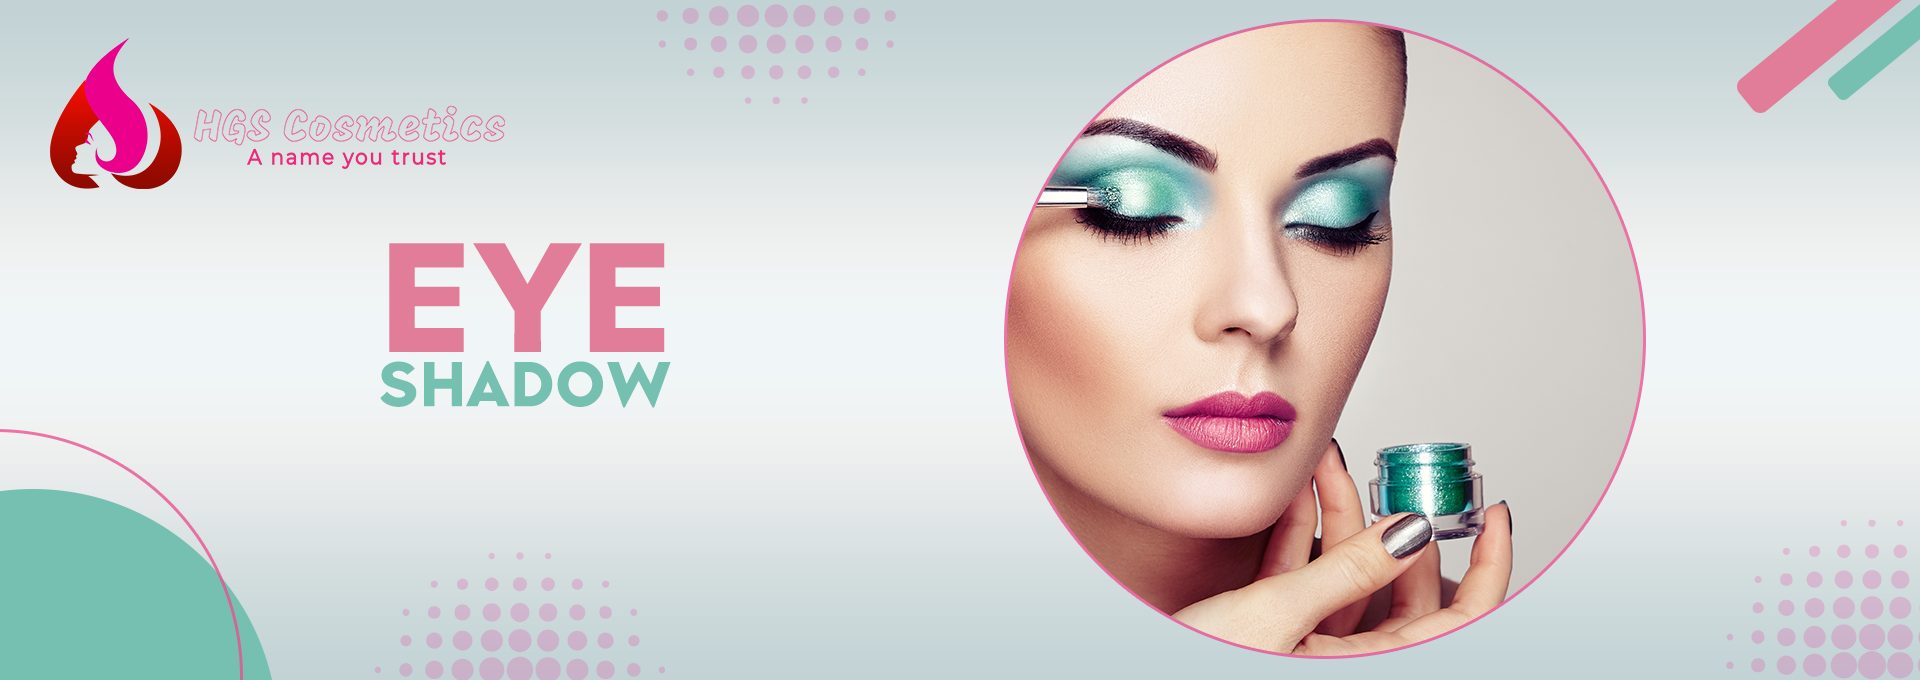 Shop Best Eyeshadow products Online @ HGS Cosmetics